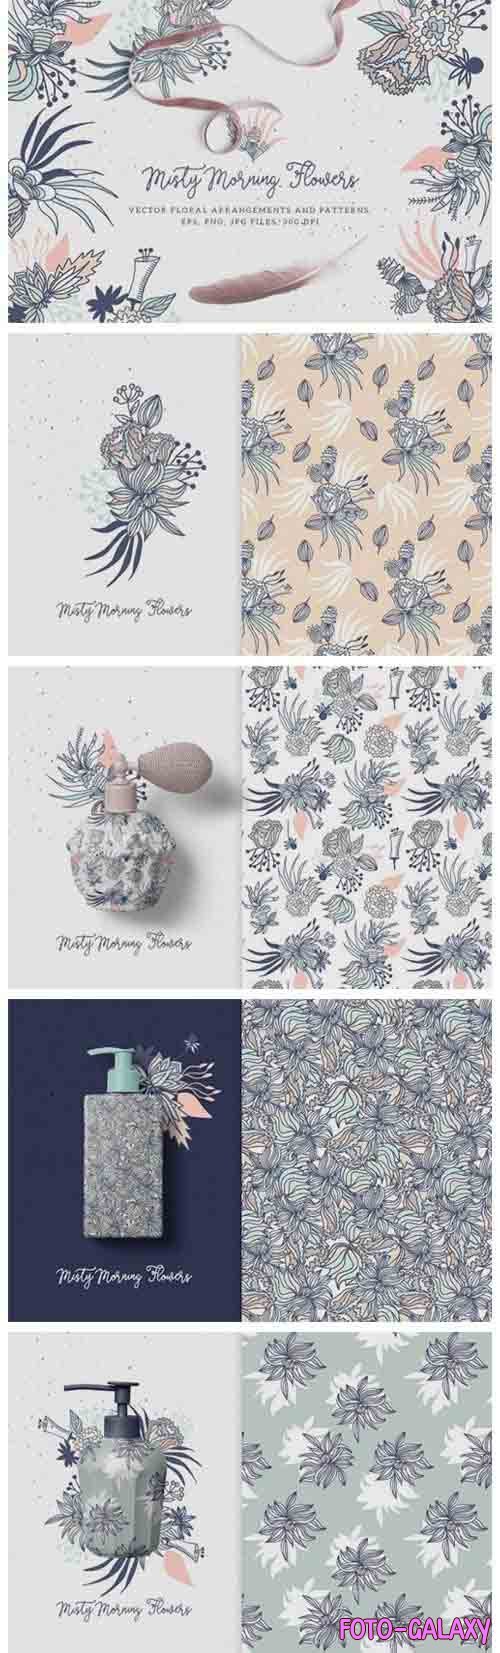 Misty Morning Flowers - Floral Clipart - 2181054